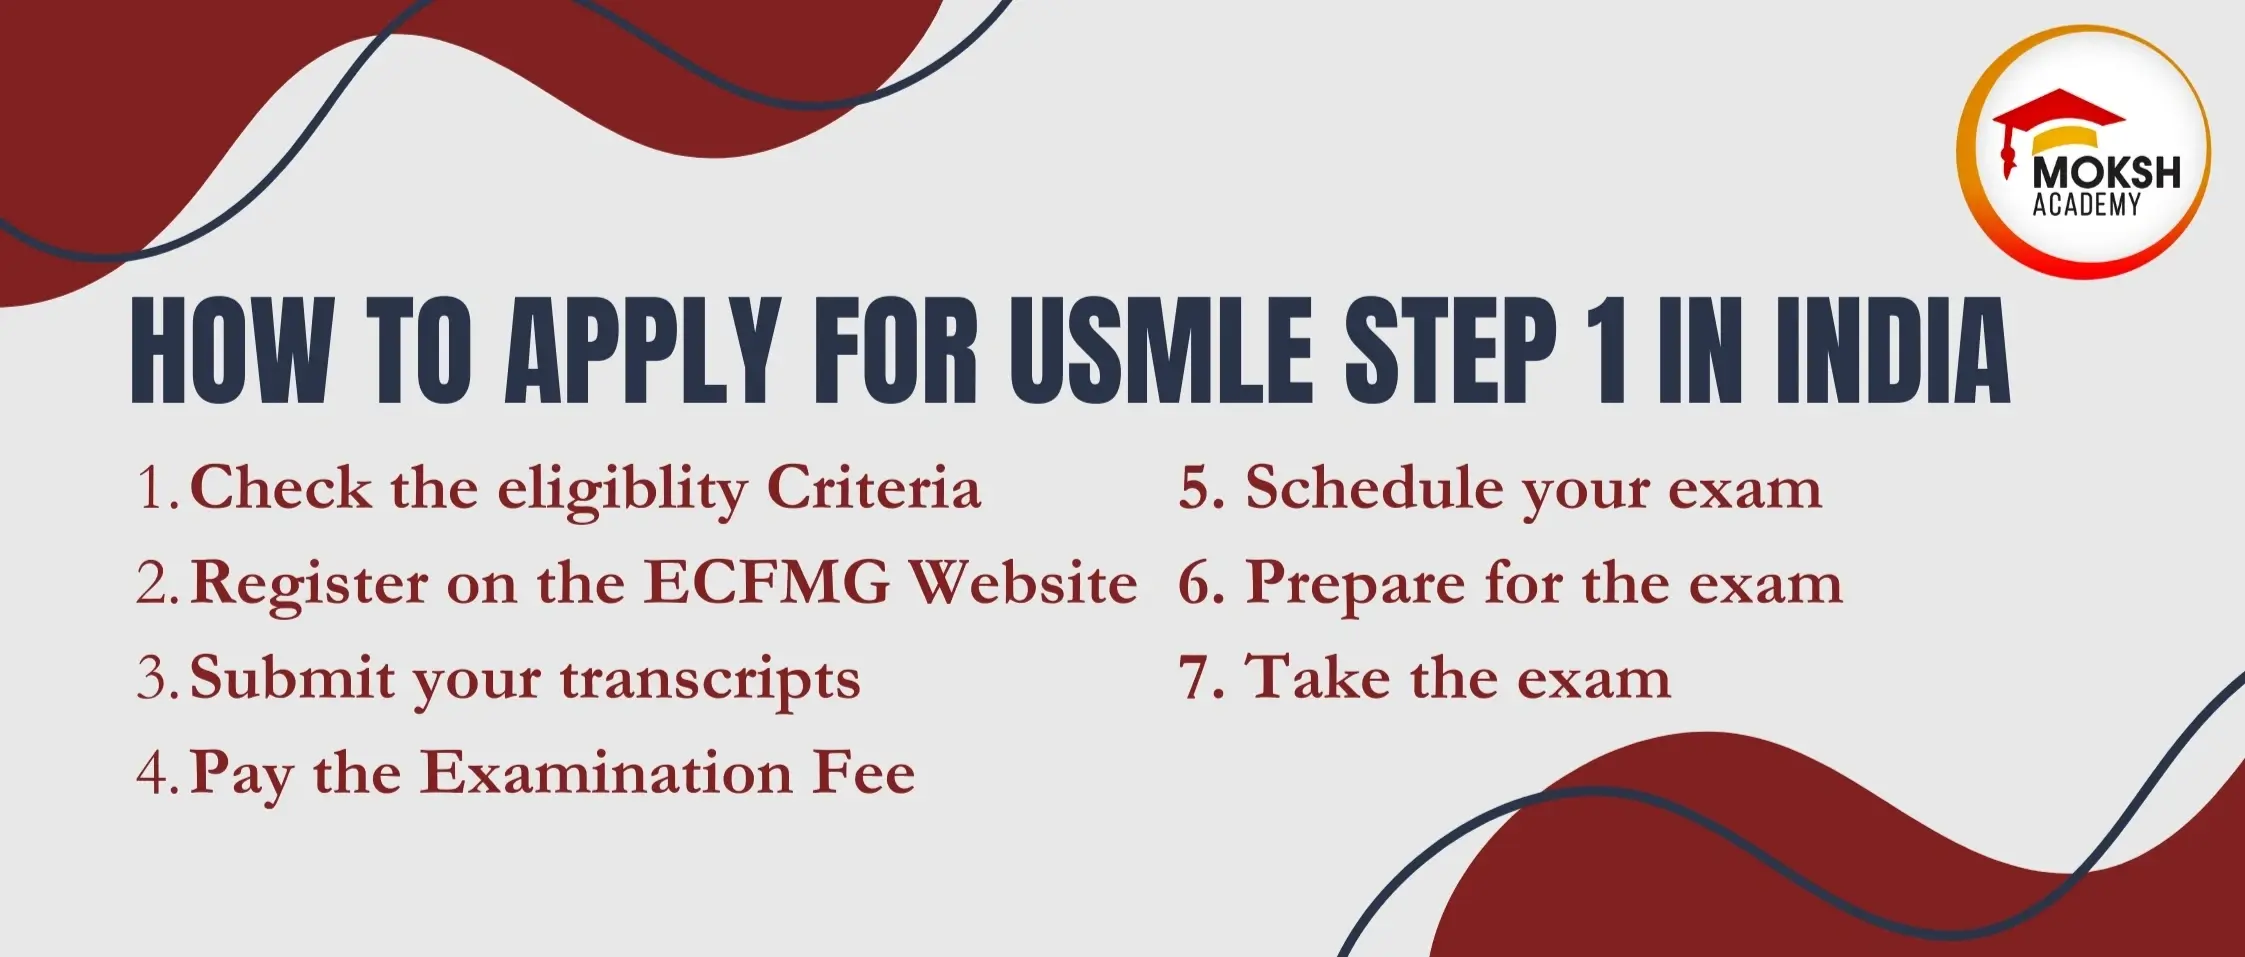 how to apply for usmle step 1